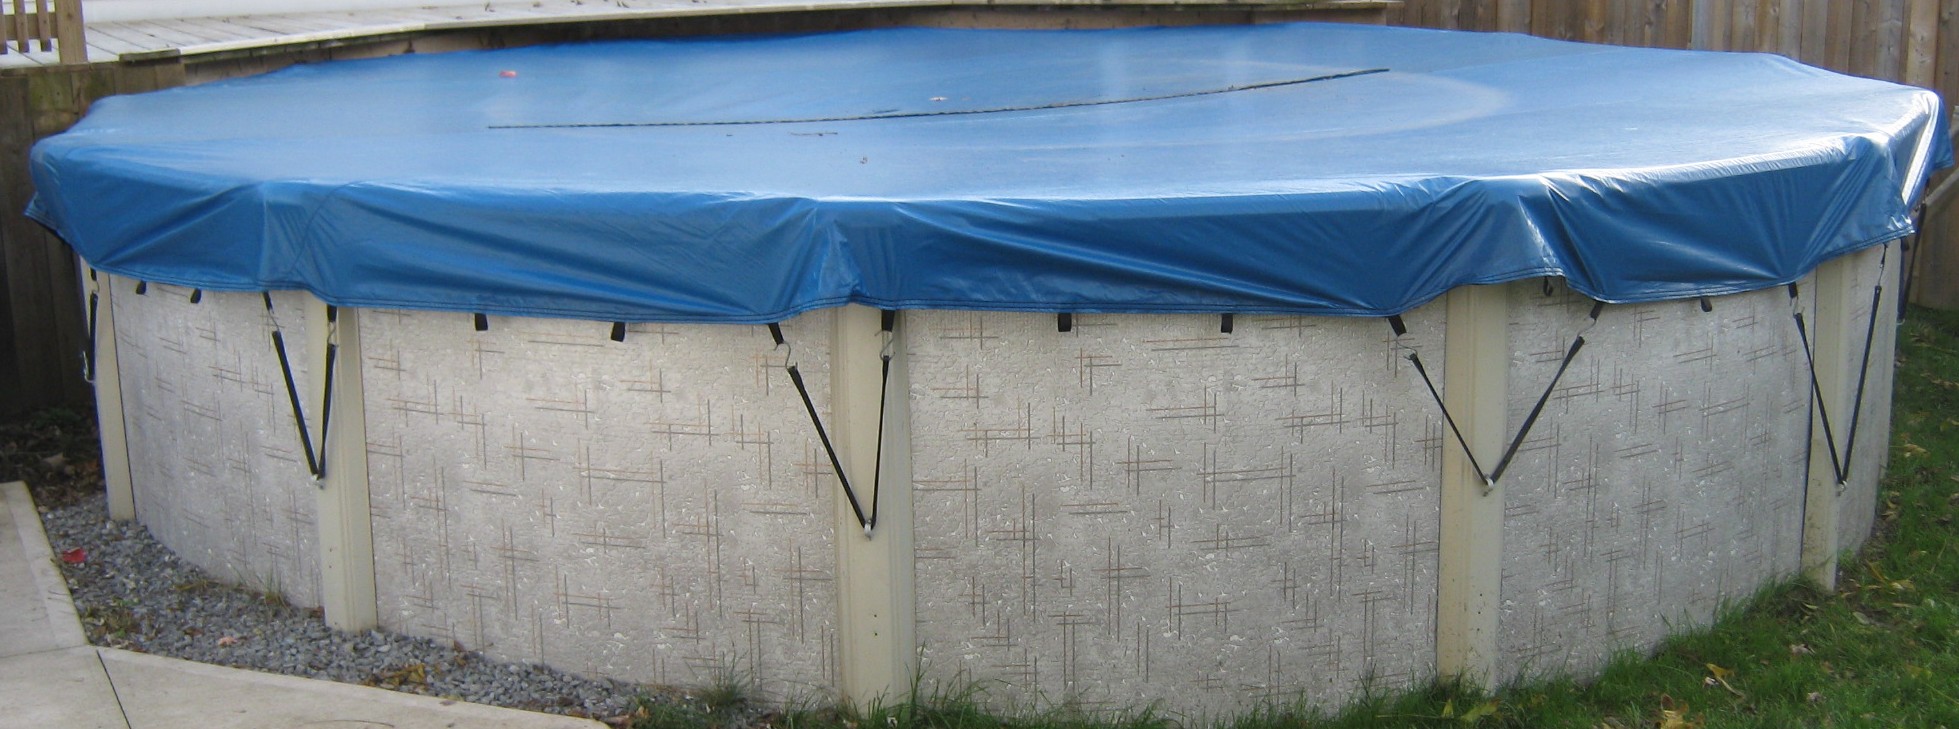 Arctic Blue Covers Above Ground, How To Install Winter Cover On Above Ground Pool